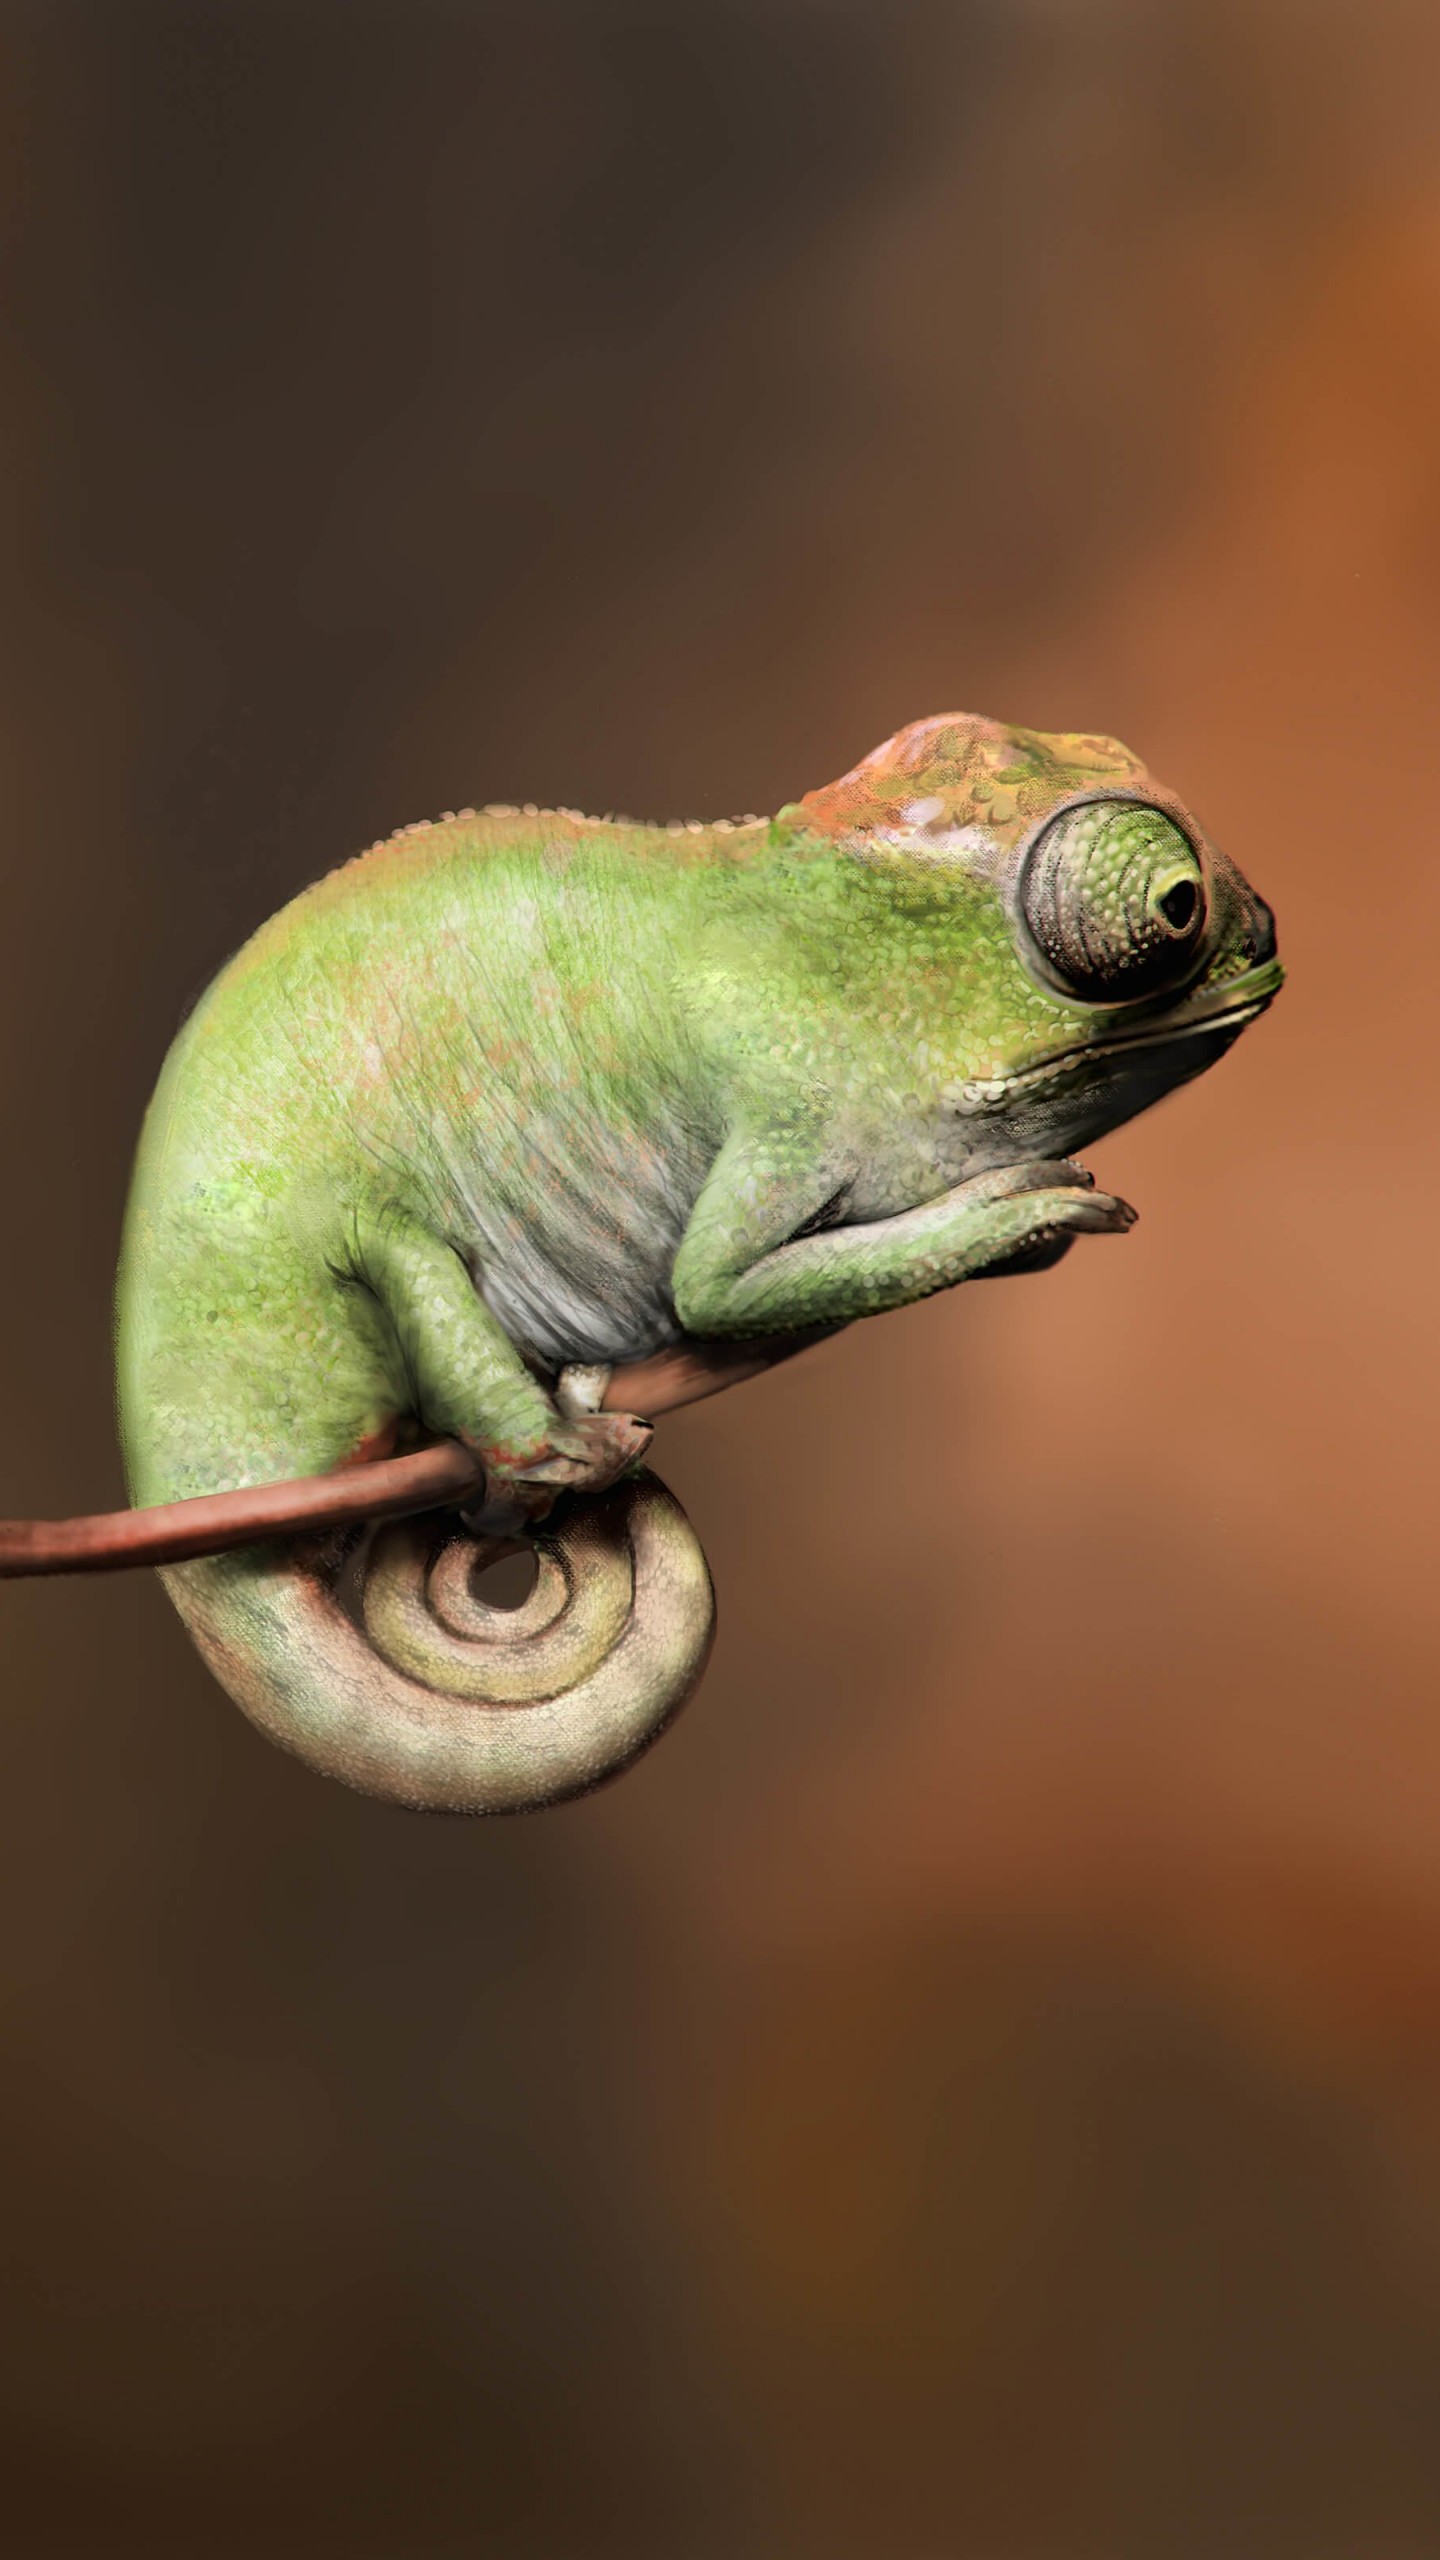 Baby Chameleon Perching On a Twisted Branch Wallpaper for LG G3